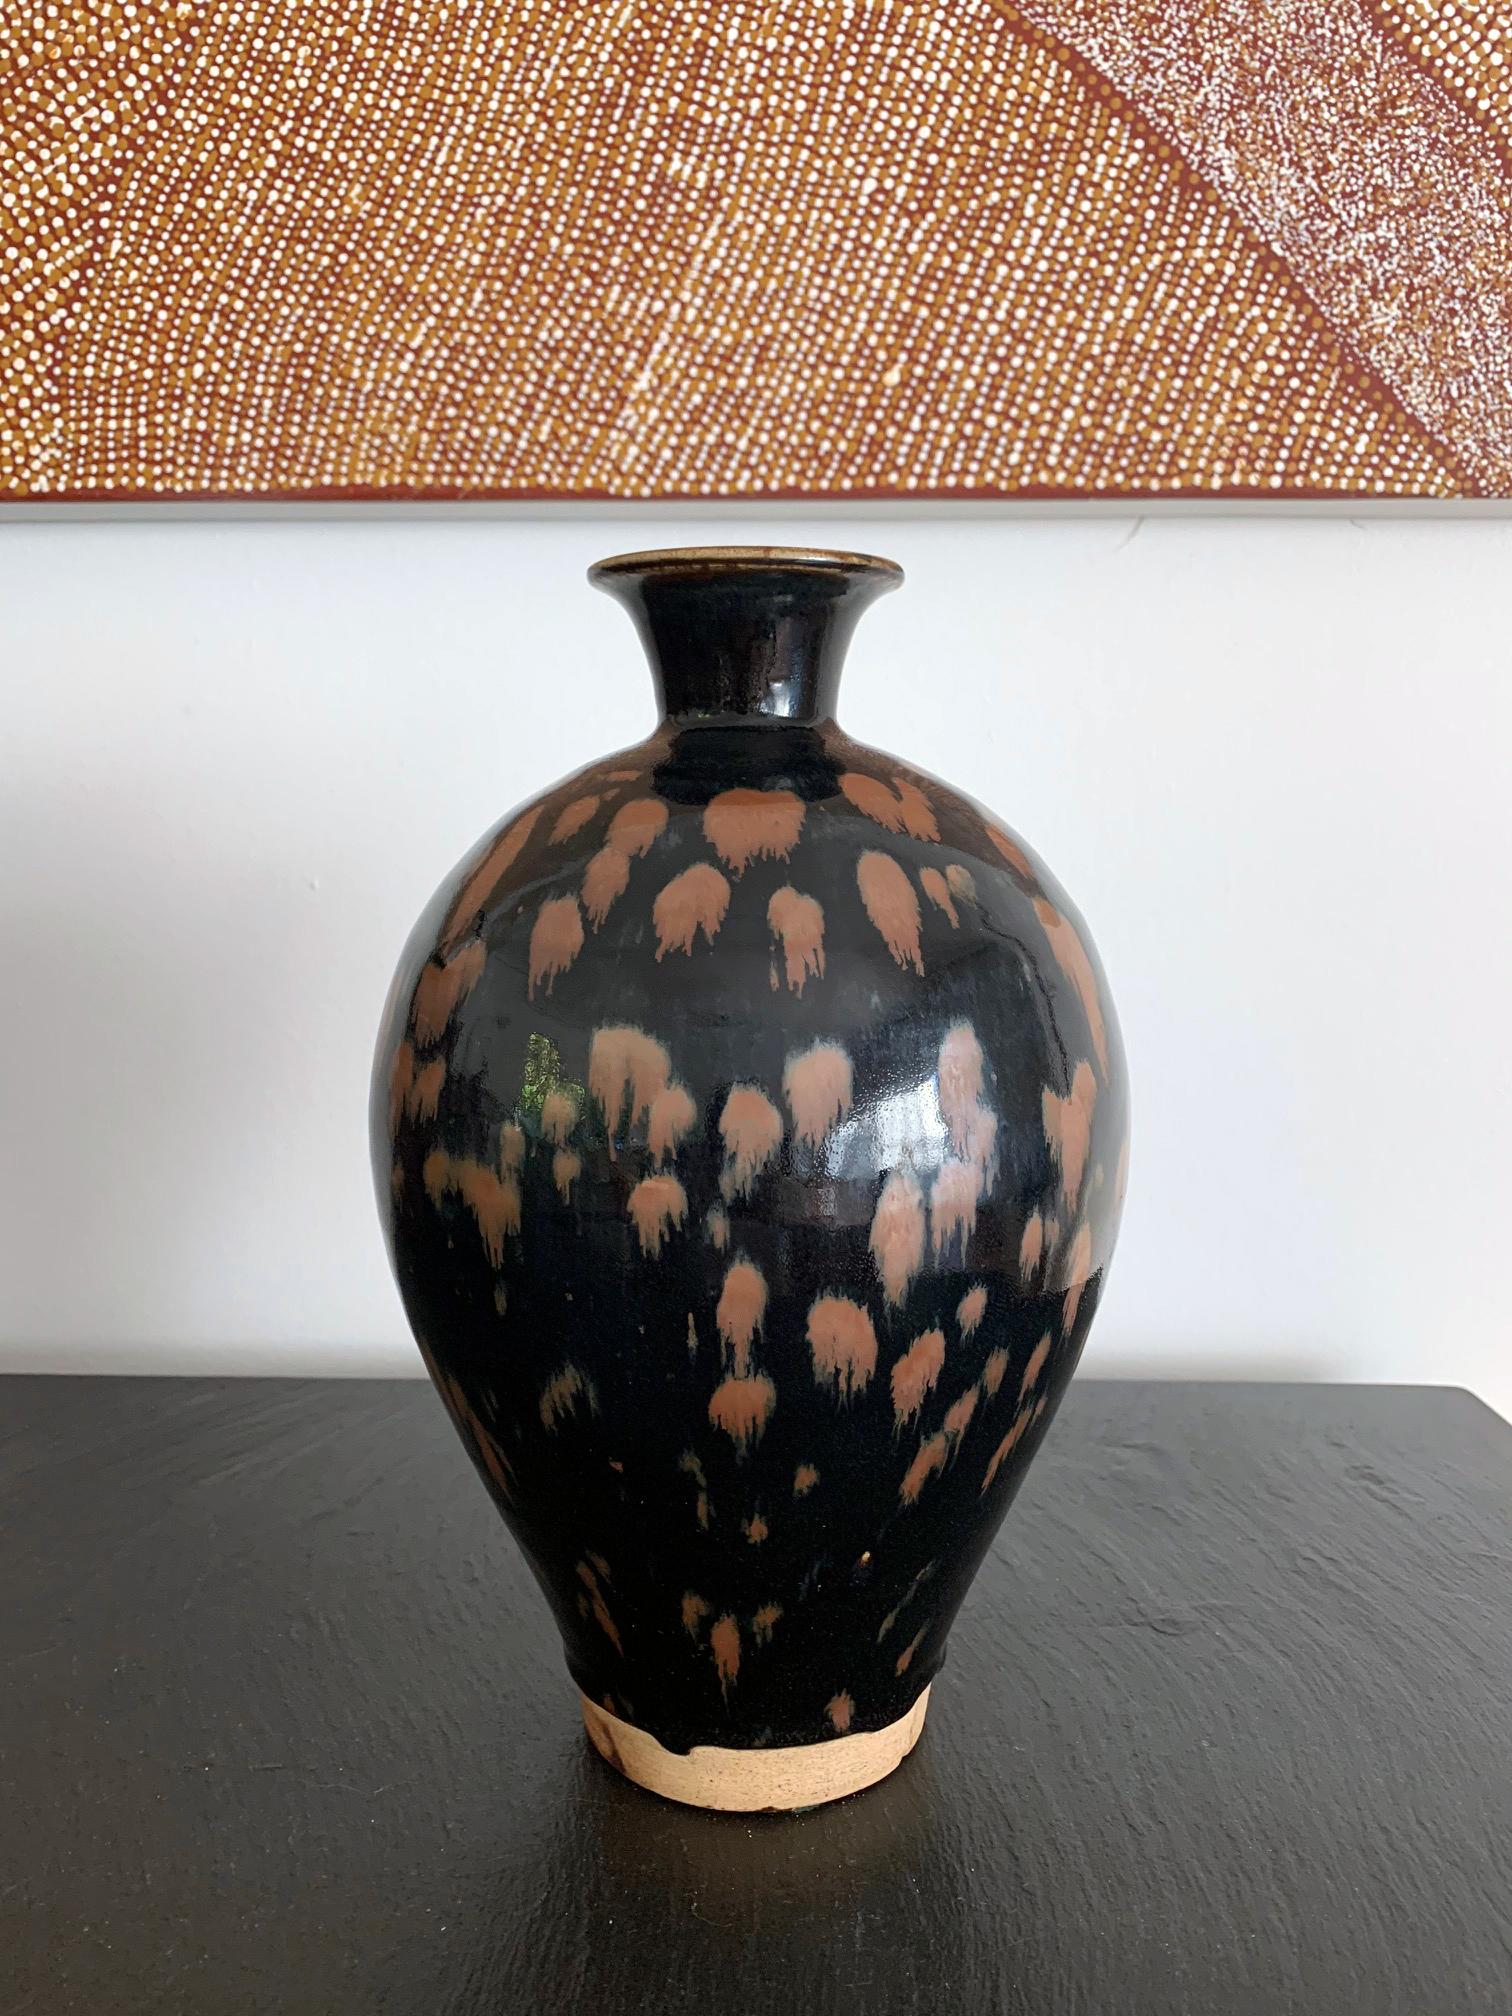 An elegant Chinese ceramic vase in the classic Meiping form, with black glaze and brown russet-splashed pattern. The russet splash glaze was an iconic glaze design from Cizhou China, Northern Song-Jin Dynasty circa 12th century. It is also known as